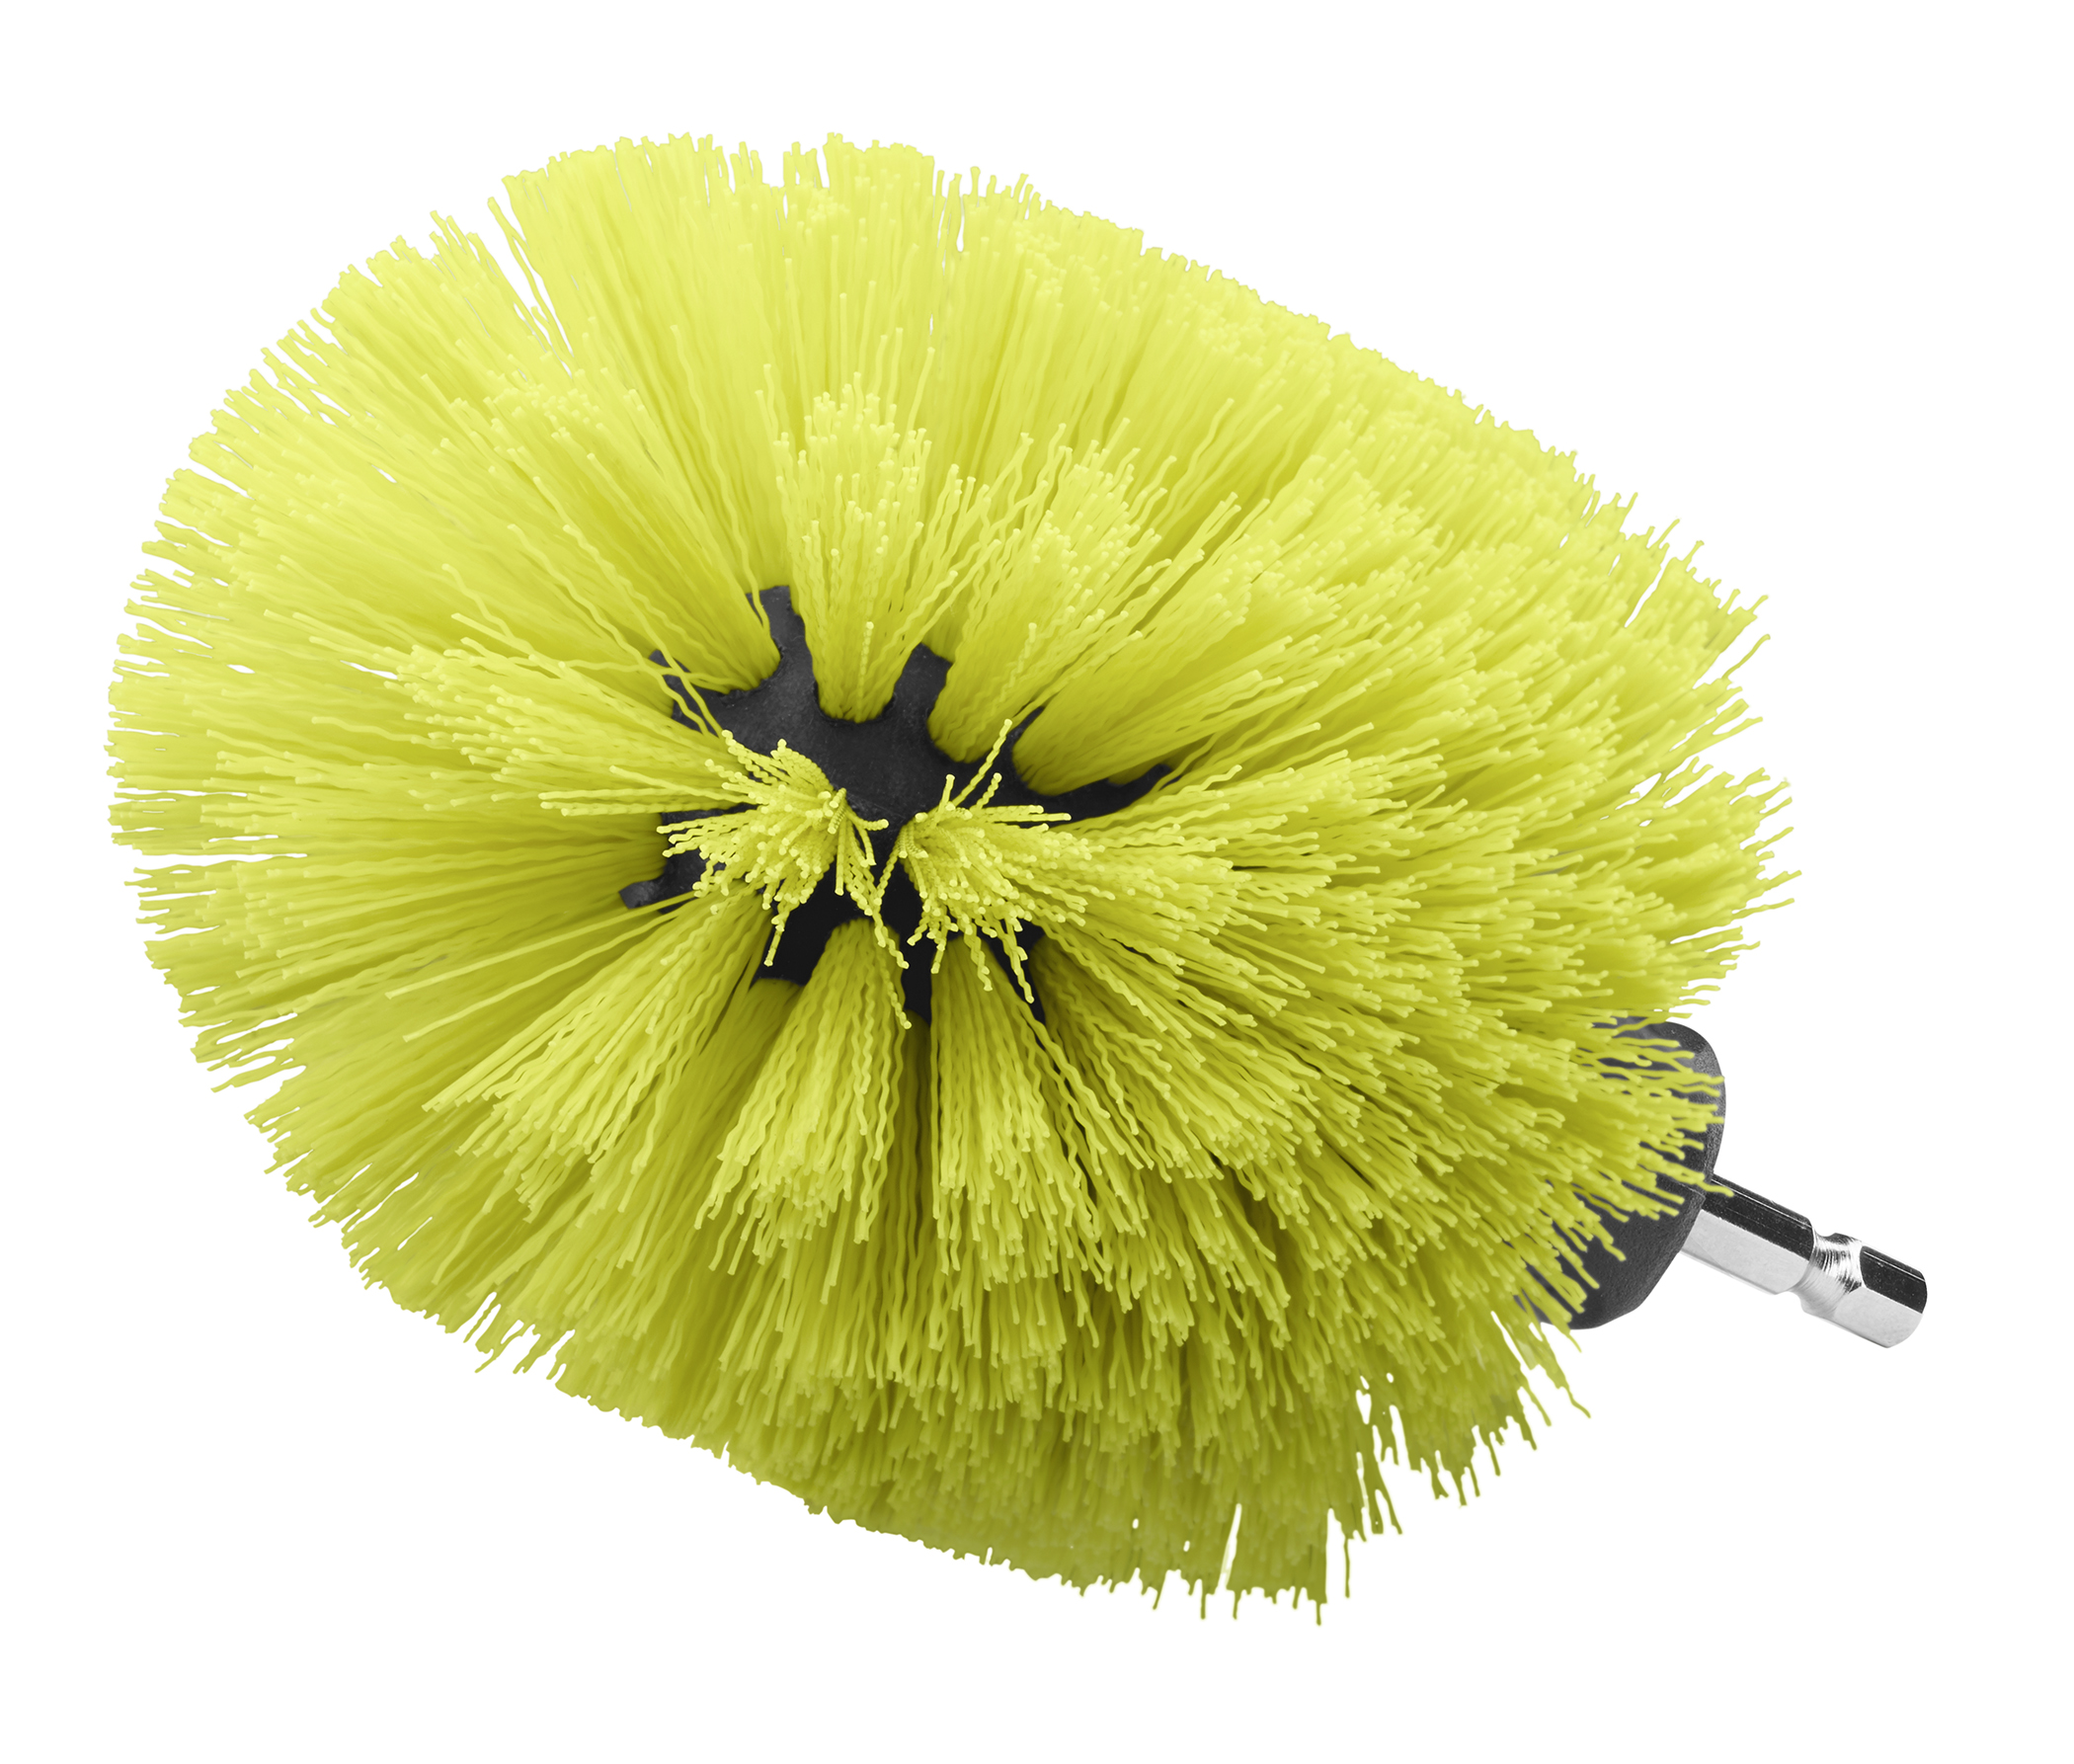 Drill Cleaning Brush Set - Soft Bristle (4-Piece) – Ryobi Deal Finders